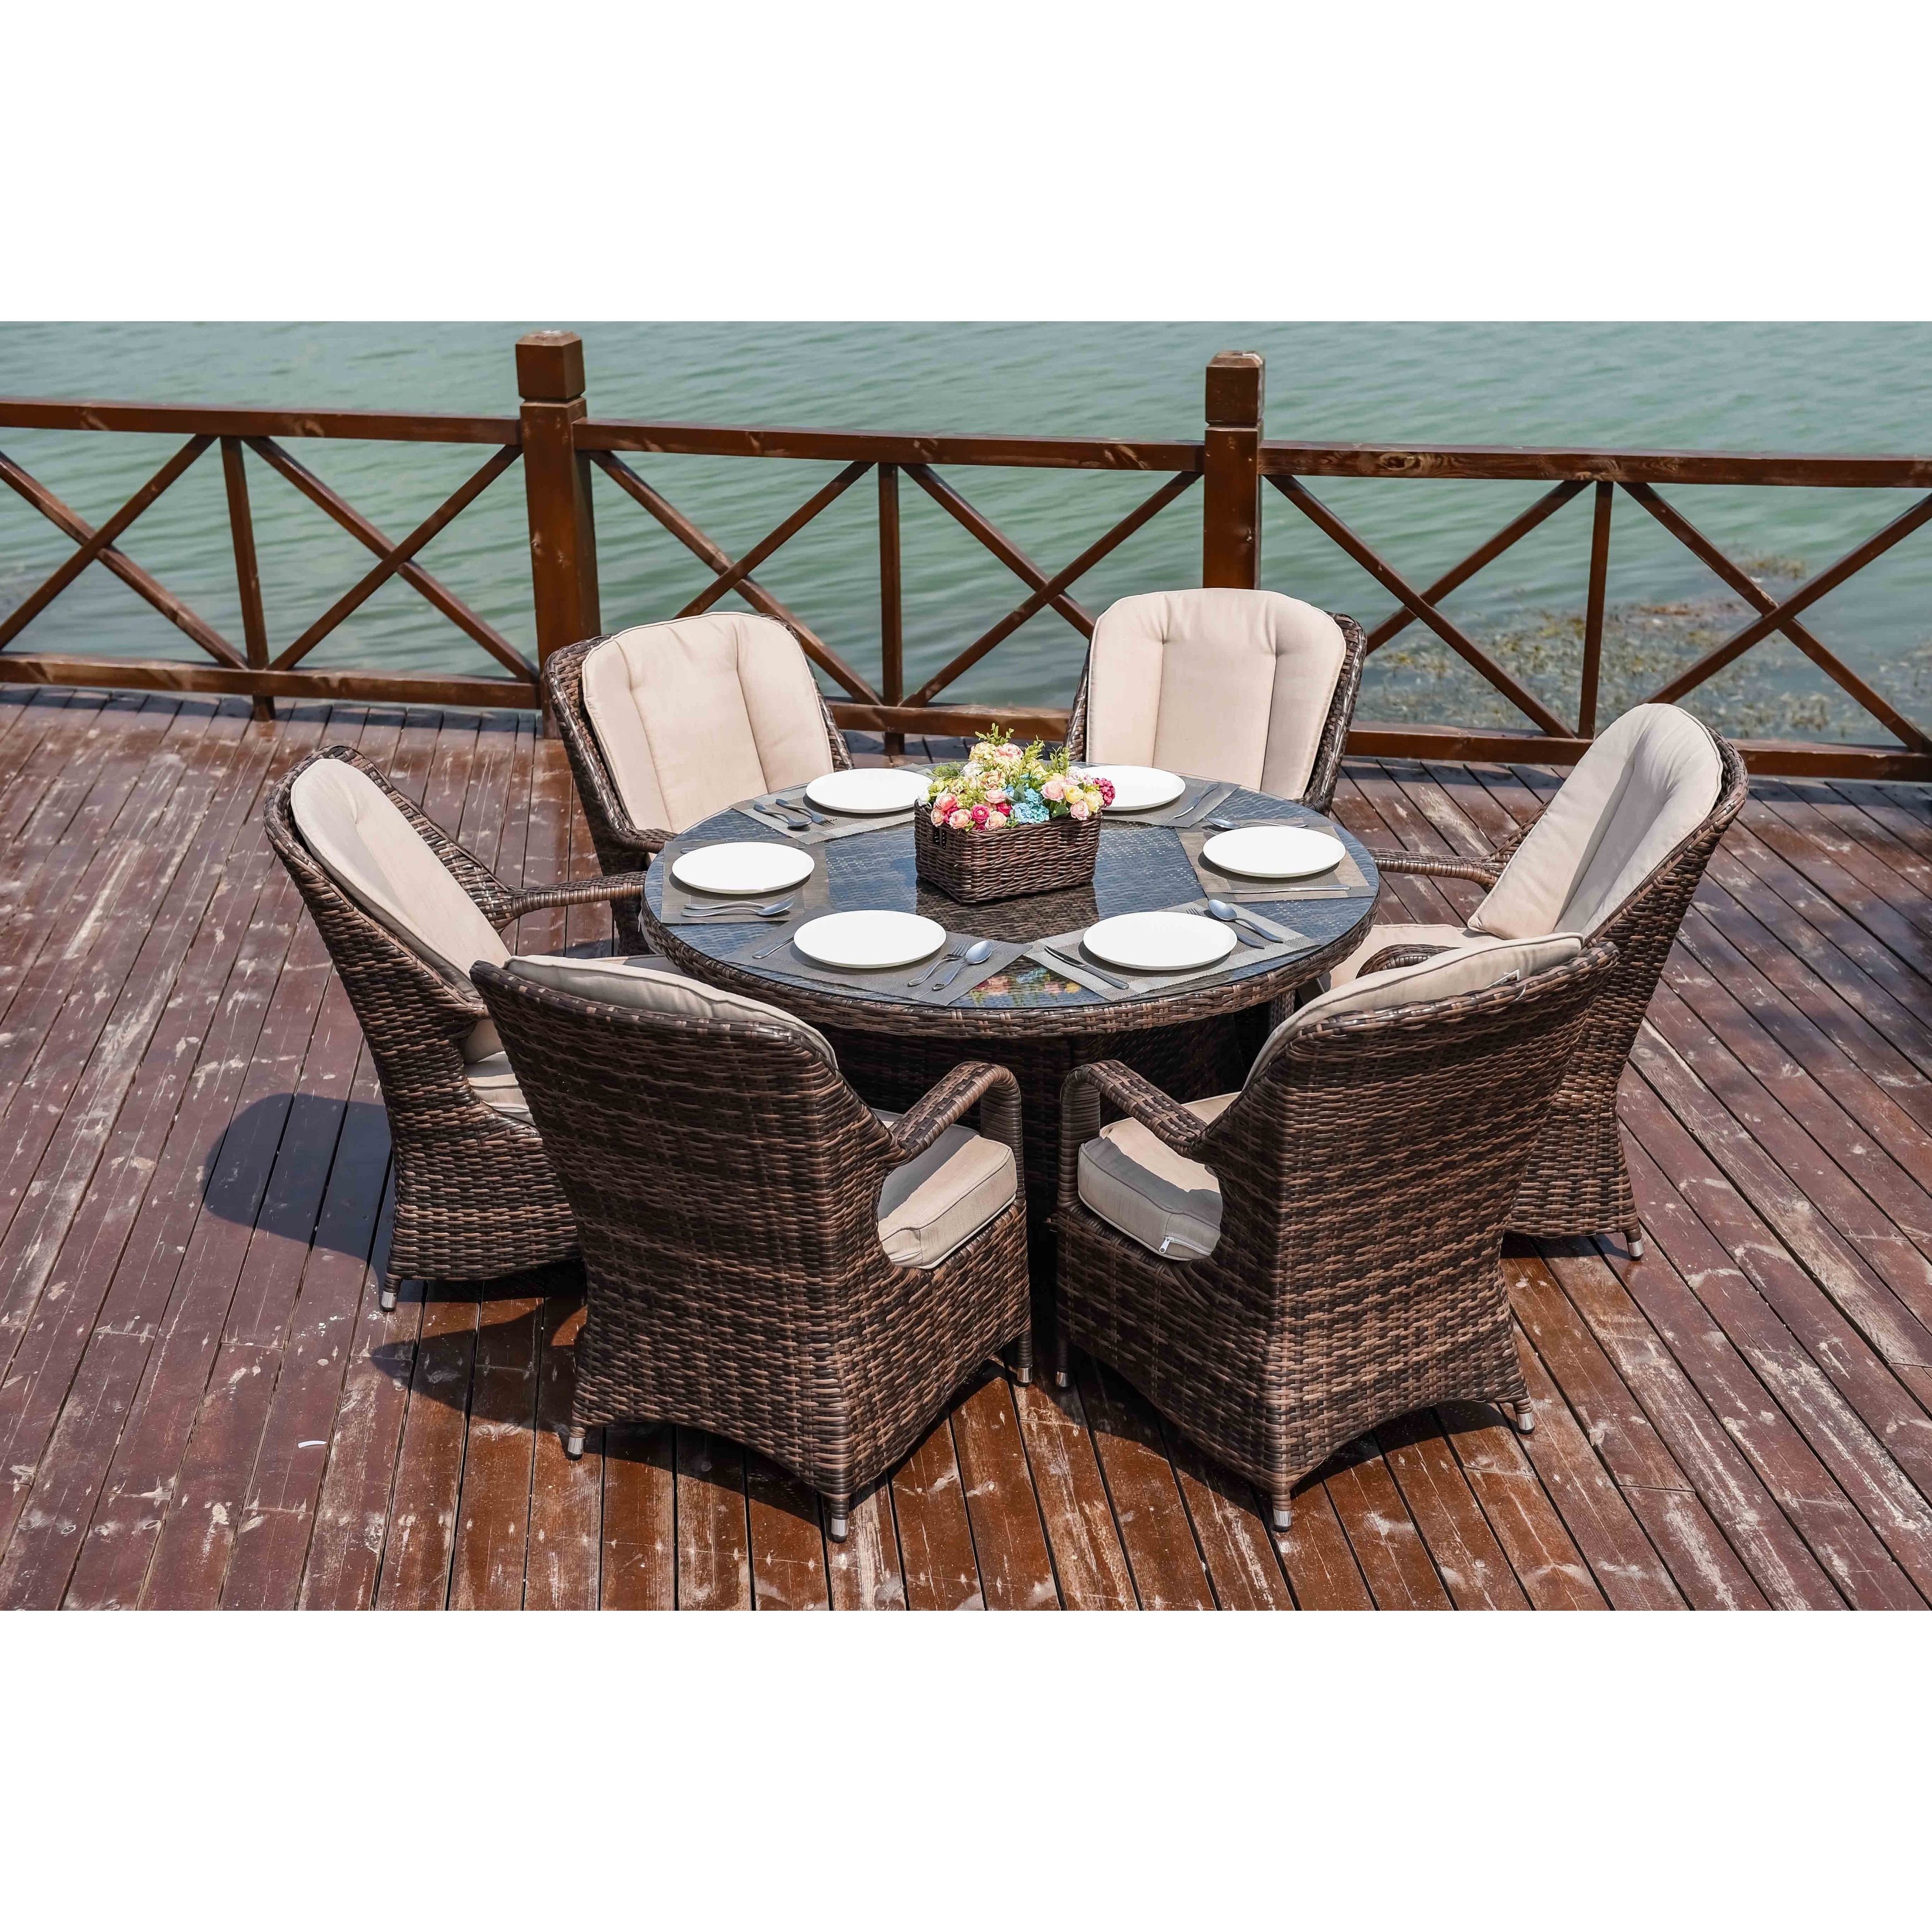 Abrihome Rattan Wicker Round 7 Piece Patio Dining Set with Cushions